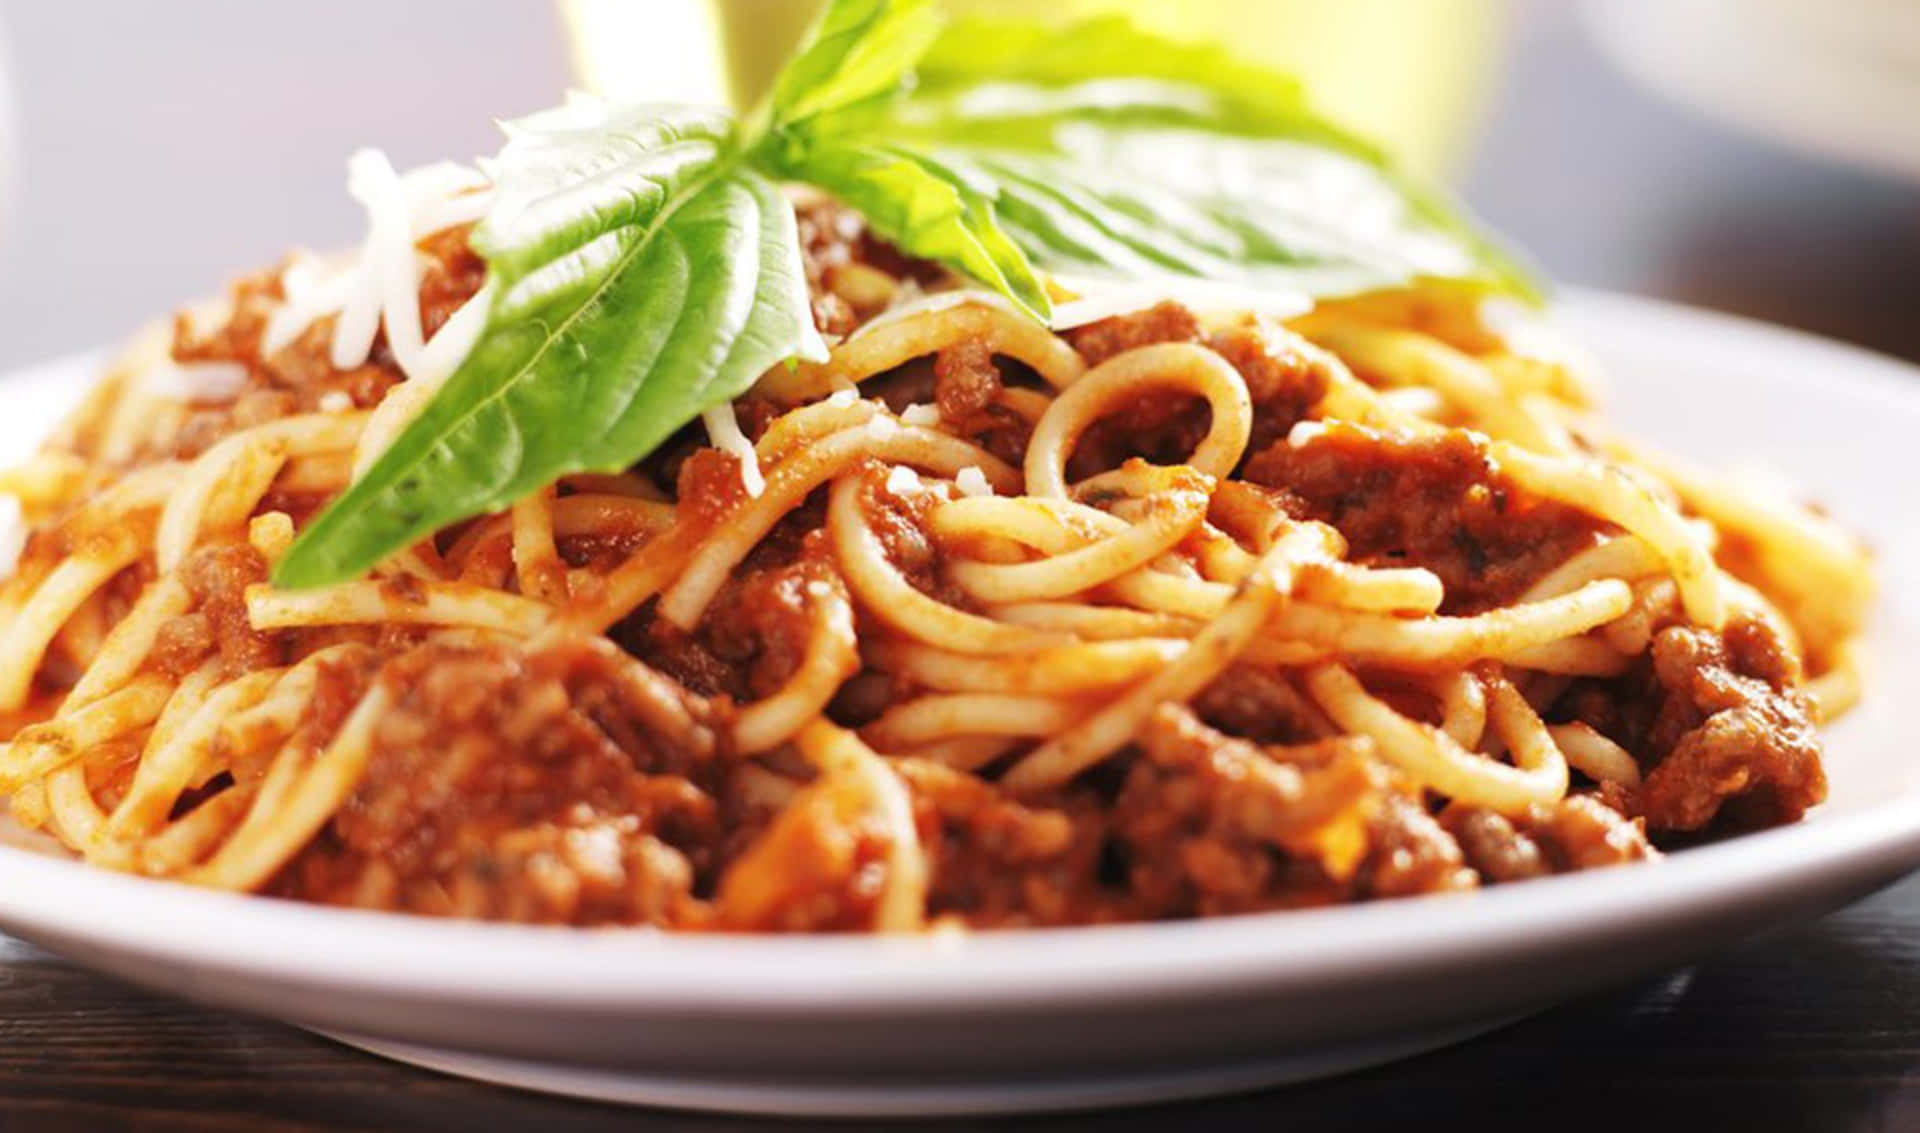 A Plate Of Spaghetti With Meat And Basil